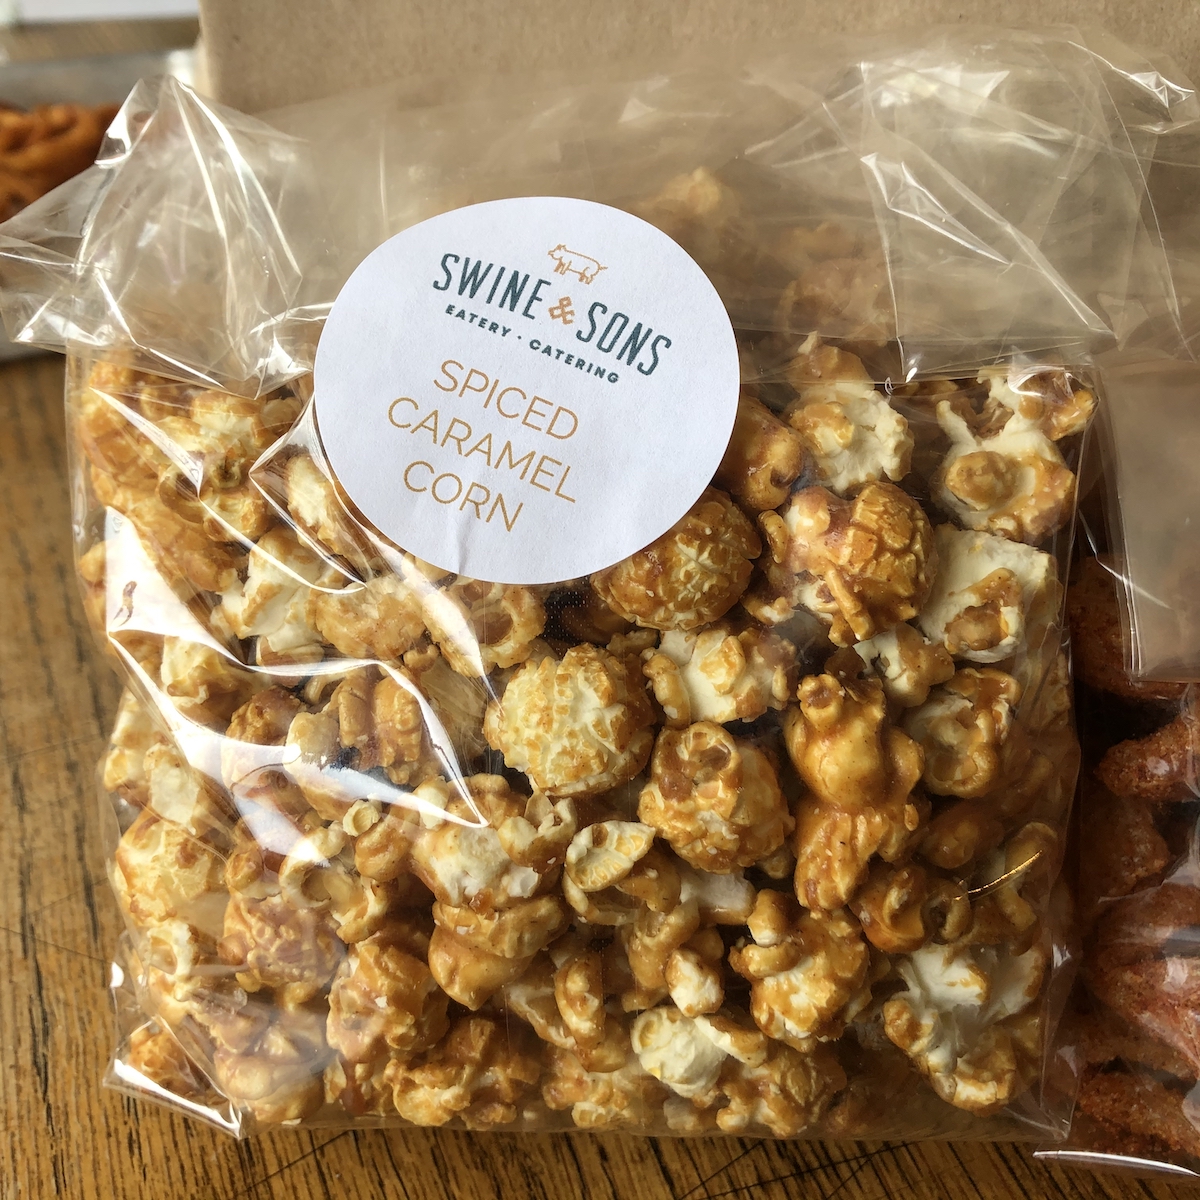 Spiced Caramel Corn from Swine and Sons in Orlando, Florida